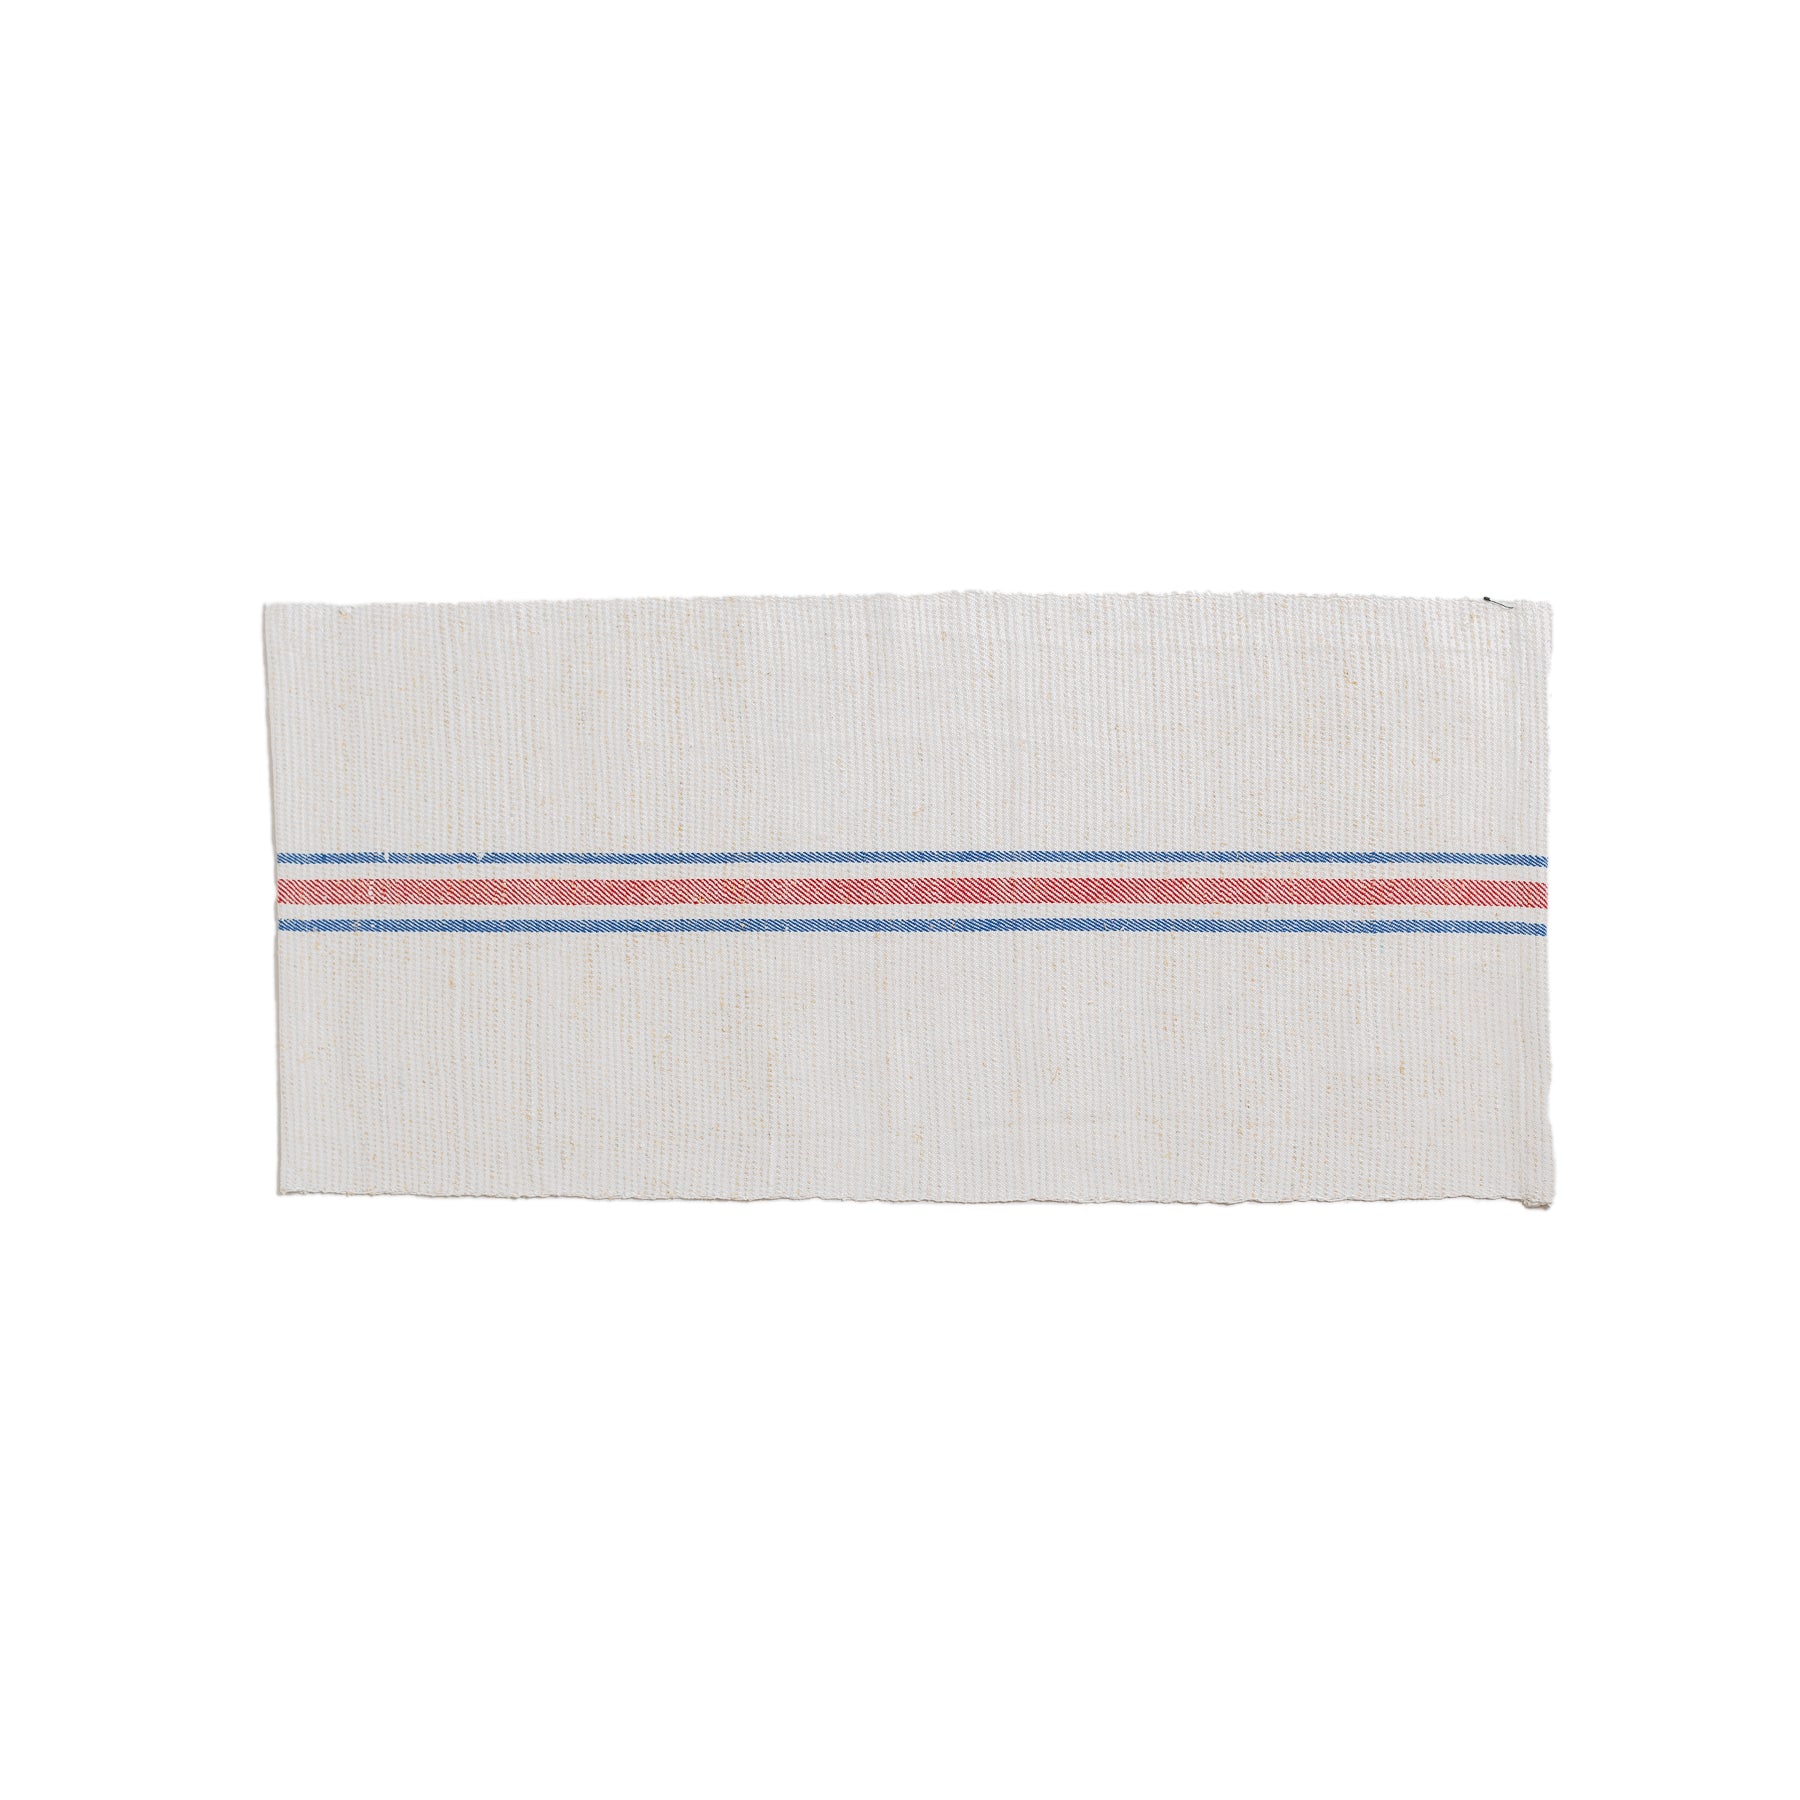 Handwoven Hemp Mat in Natural With Double Blue and Single Red Stripe